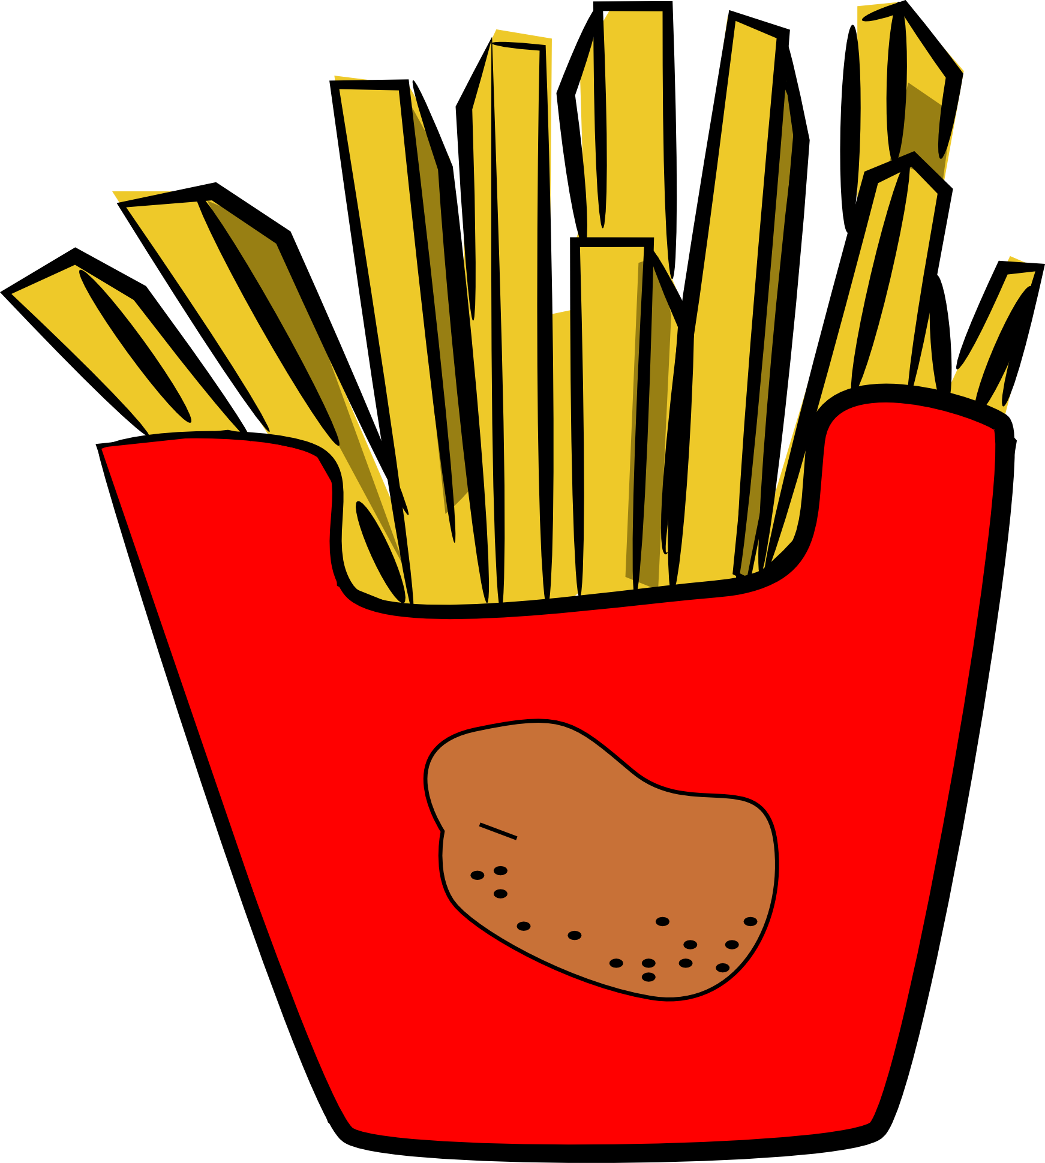 French Fries Clip Art - French Fries Clip Art